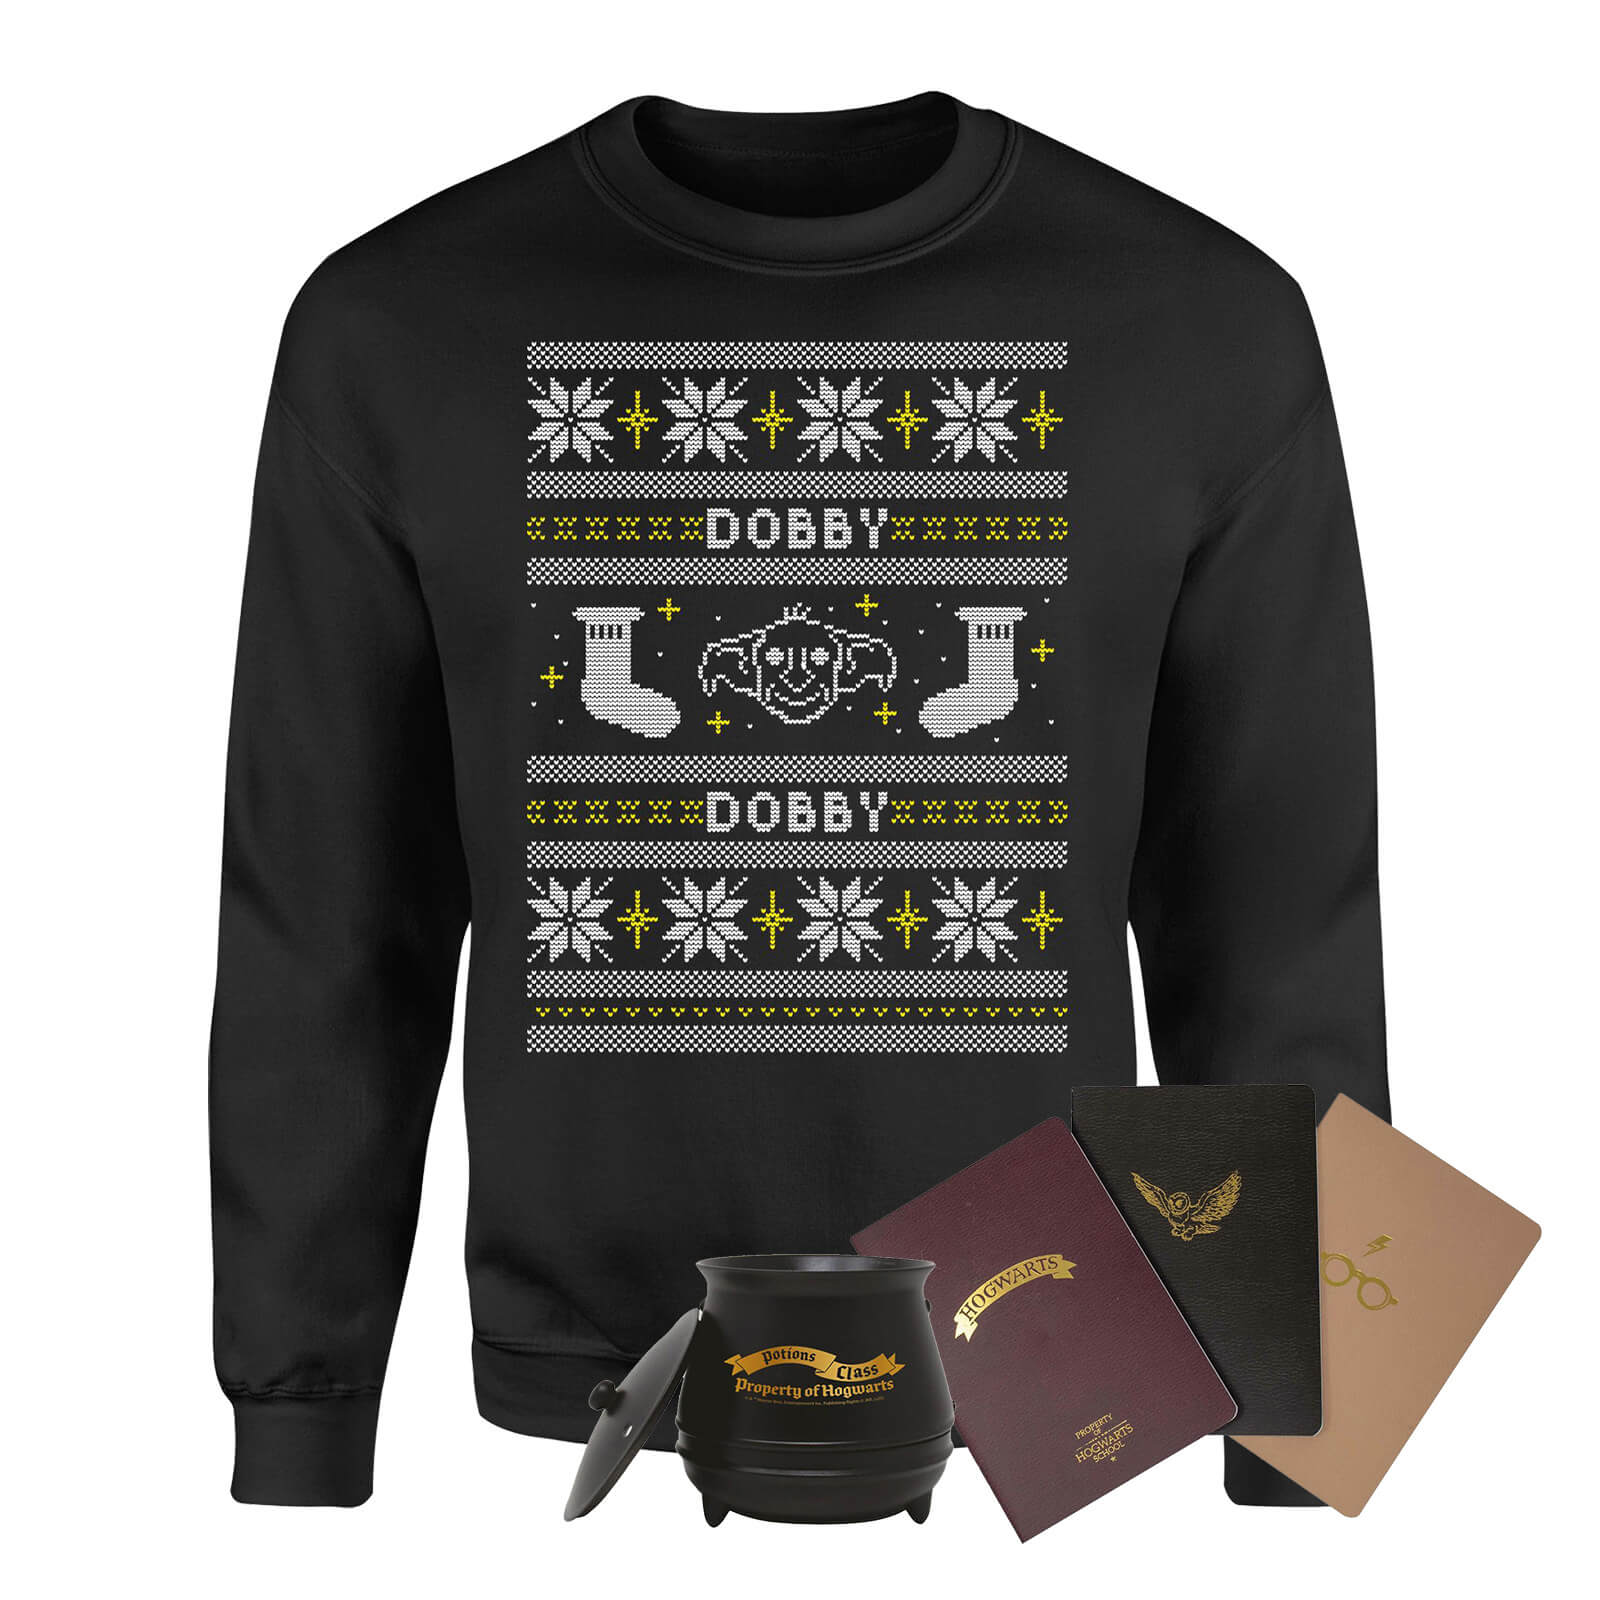 Harry Potter Officially Licensed MEGA Christmas Gift Set - Includes Christmas Sweatshirt plus 3 gifts - XL